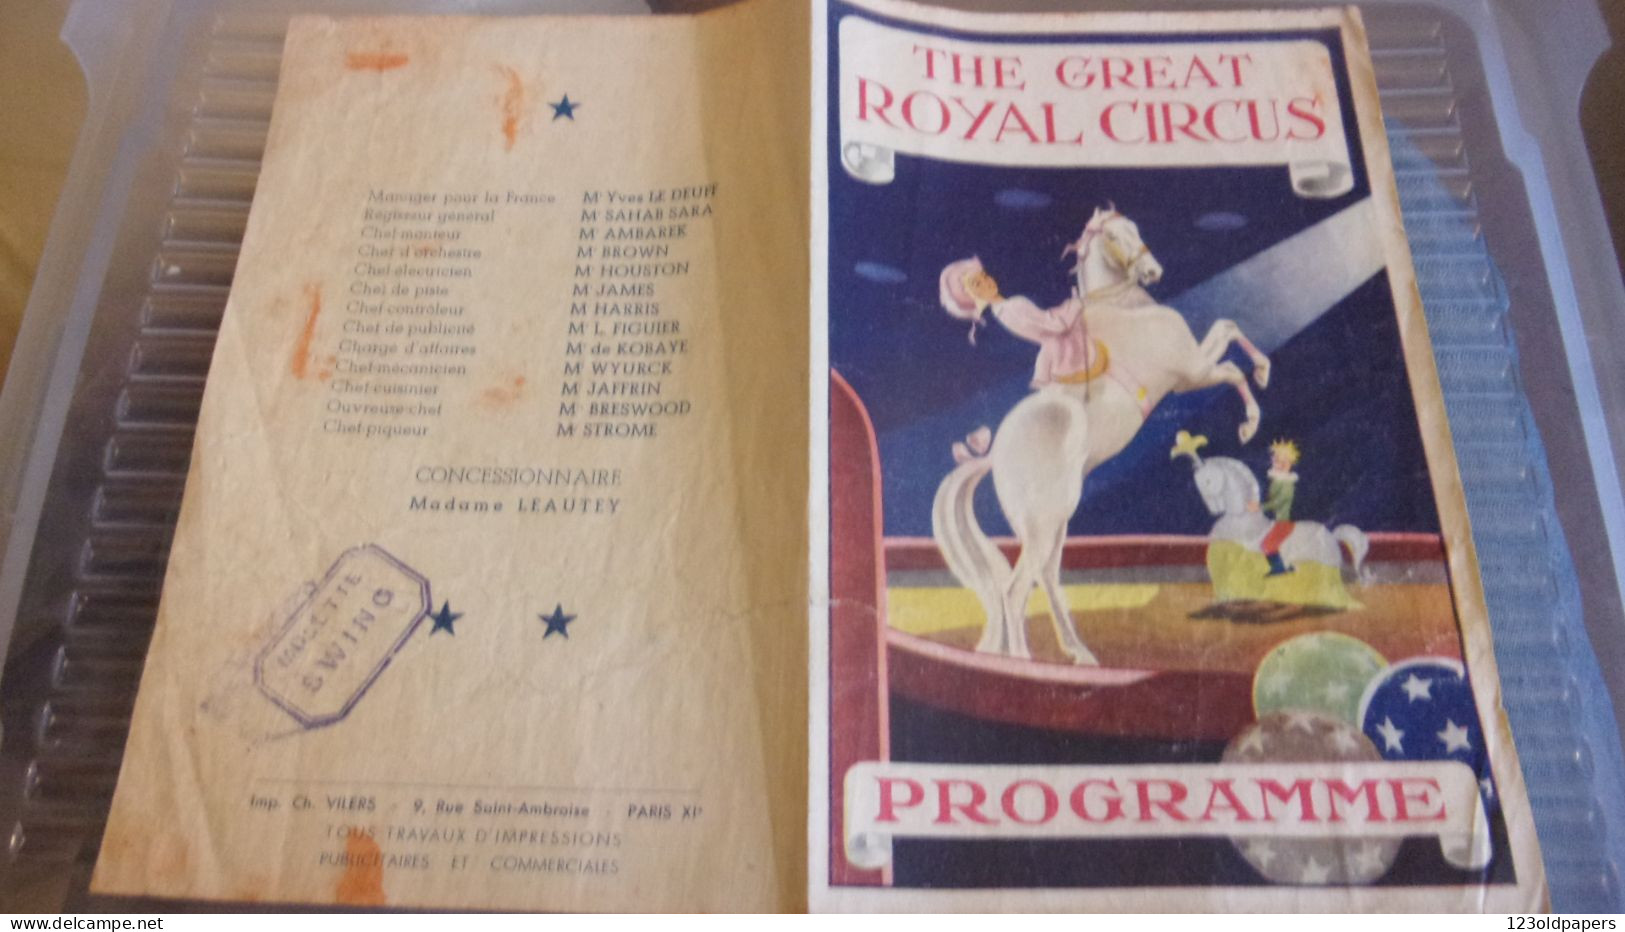 PROGRAMME CIRQUE  THE GREAT ROYAL CIRCUS  FRATELLINI VICTOR - Programmi